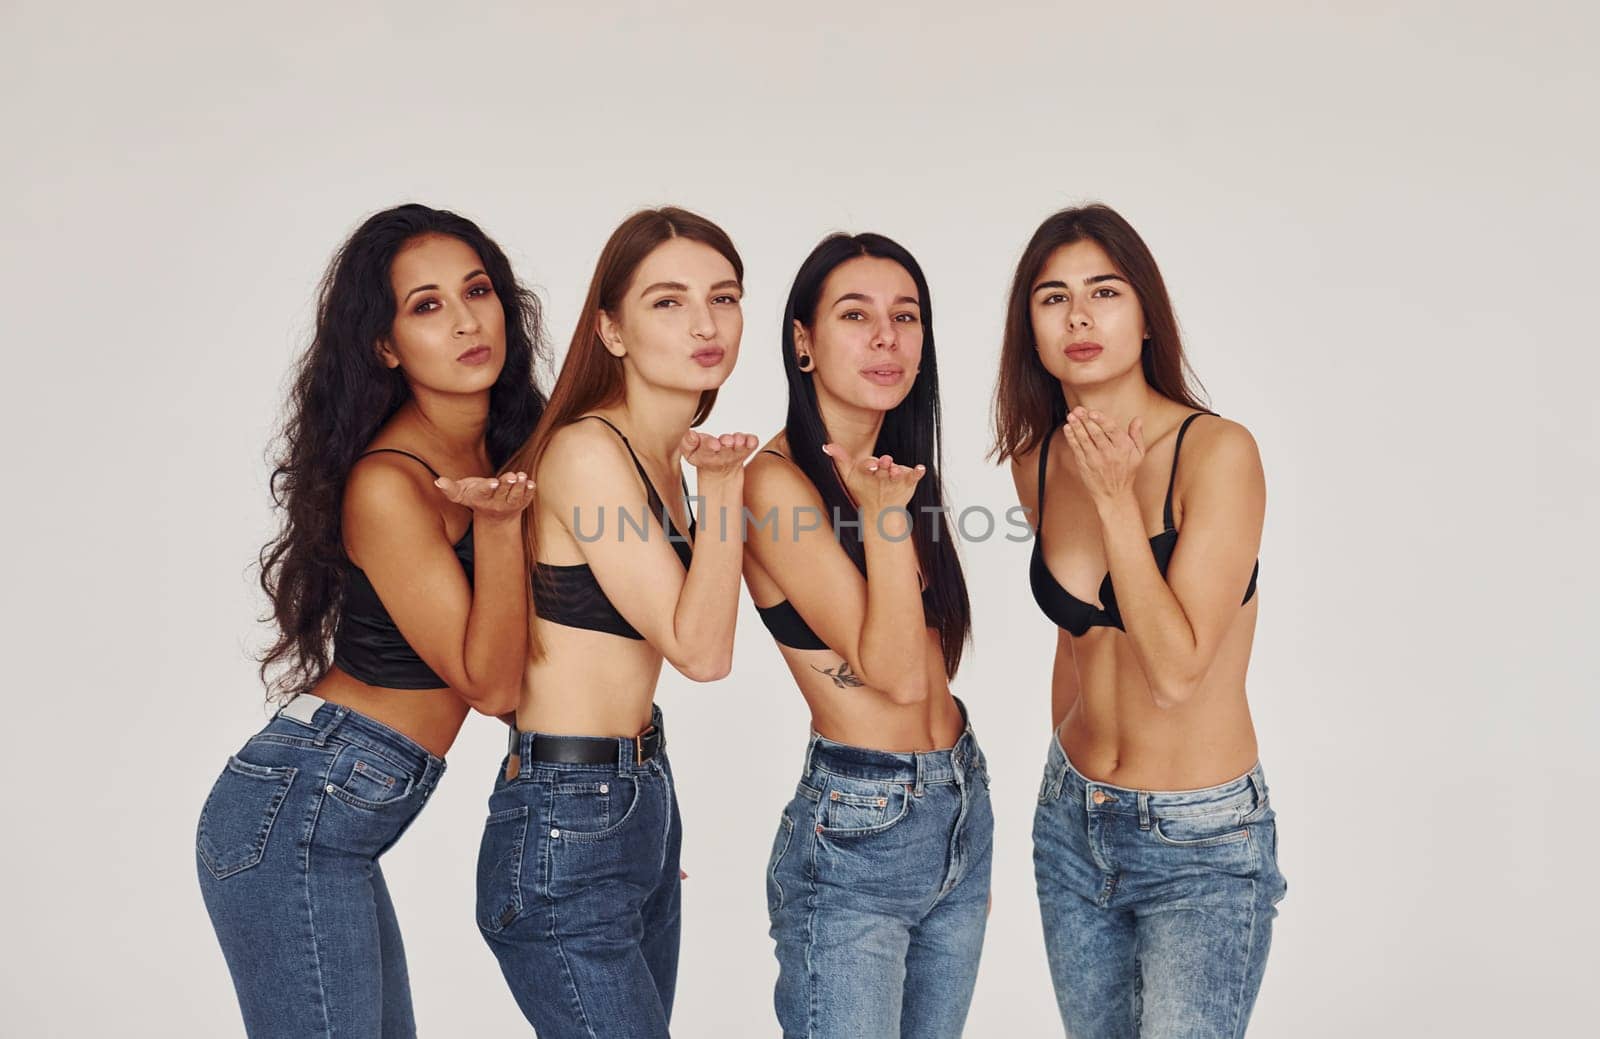 Air kiss. Four young women in lingerie together indoors. White background by Standret